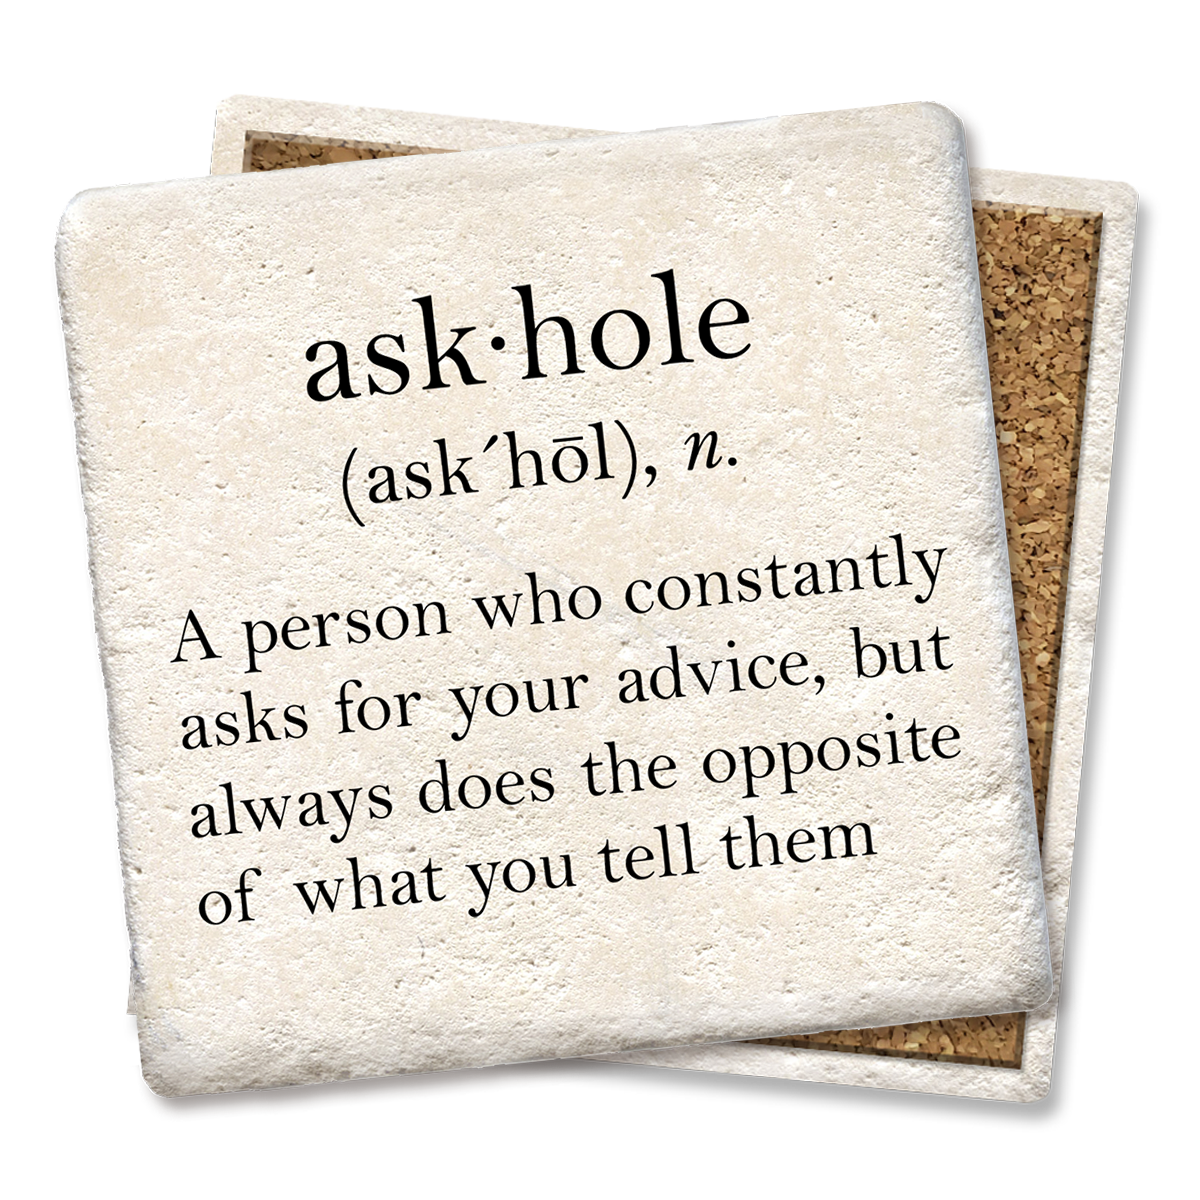 Askhole definition coaster  Tipsy Coasters & Gifts   